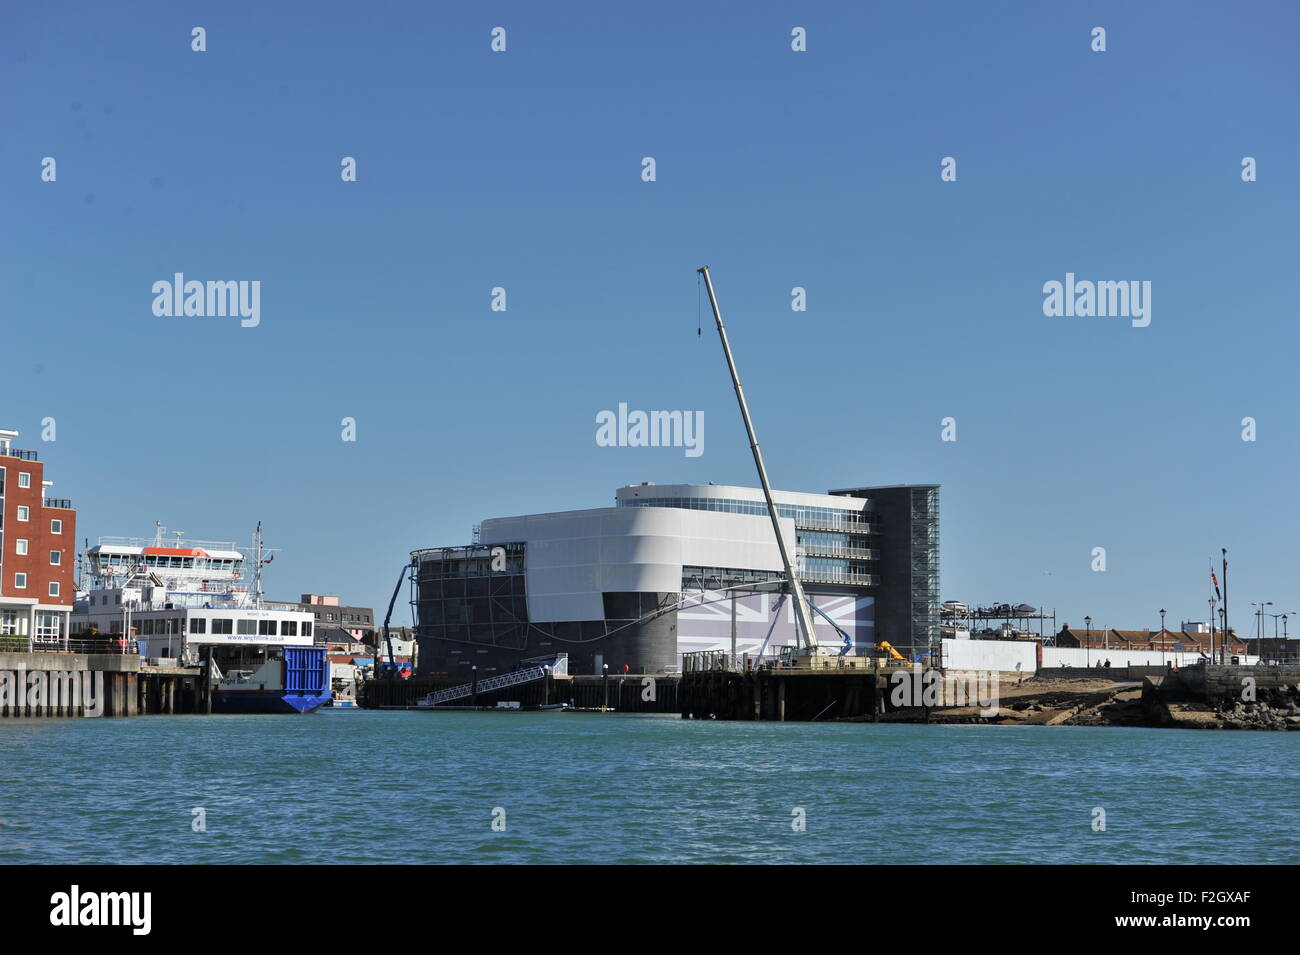 Portsmouth Hampshire UK - The Ben Ainslie Racing Americas Cup headquarters building Stock Photo